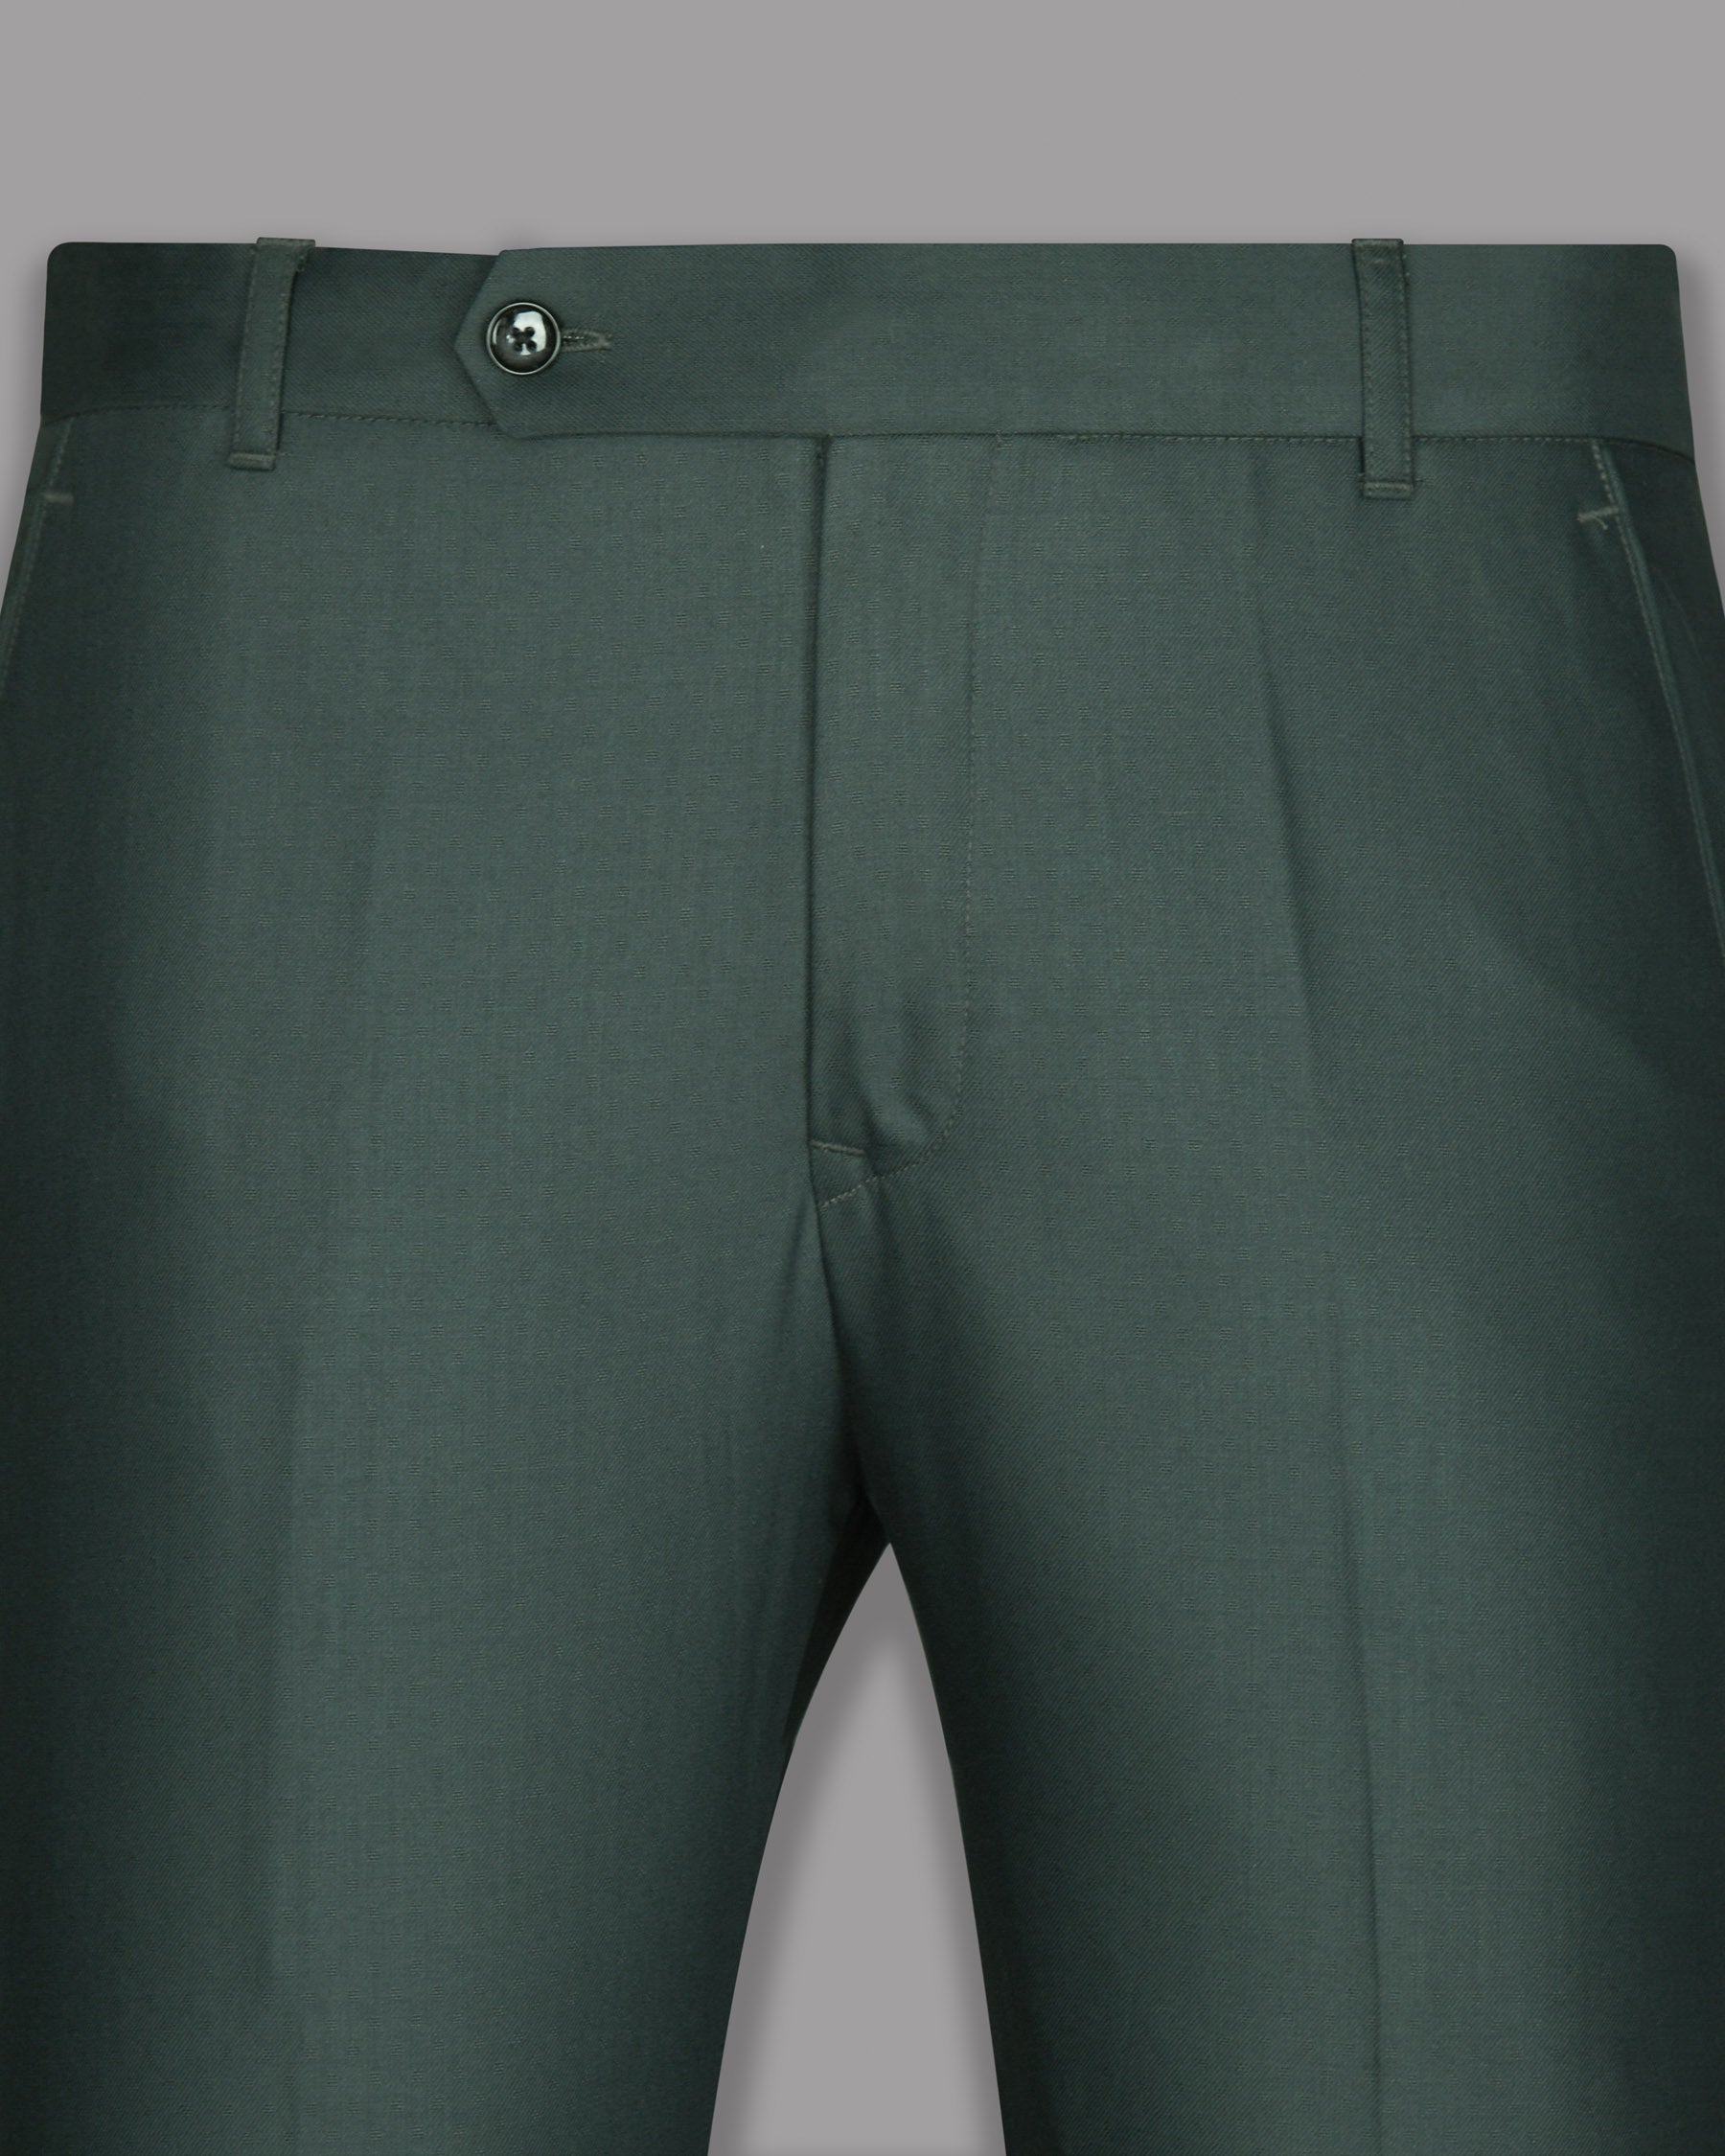 Phthalo Green Micro Dotted Wool Blend Pant T700-32, T700-28, T700-44, T700-30, T700-34, T700-36, T700-38, T700-40, T700-42